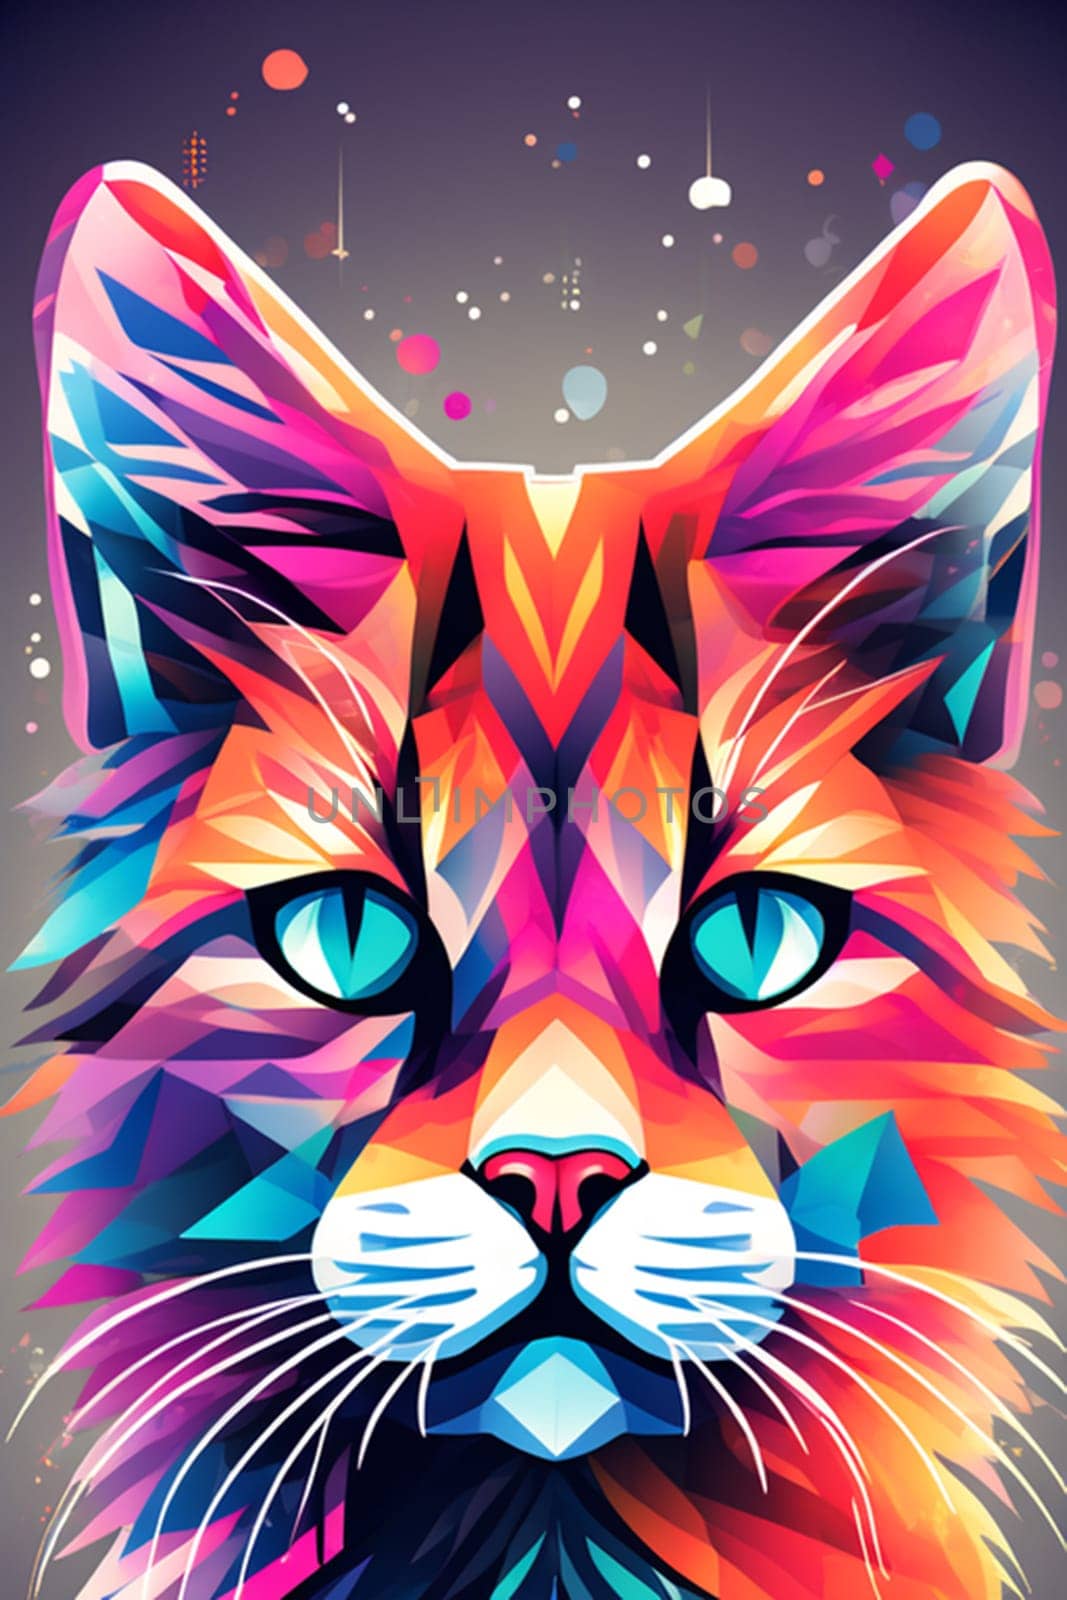 Cat head in pop art style. Minimalist style, neon line logo, depicting a mosaic geometric cat surrounded by vibrant smoke effects on a scarlet background.